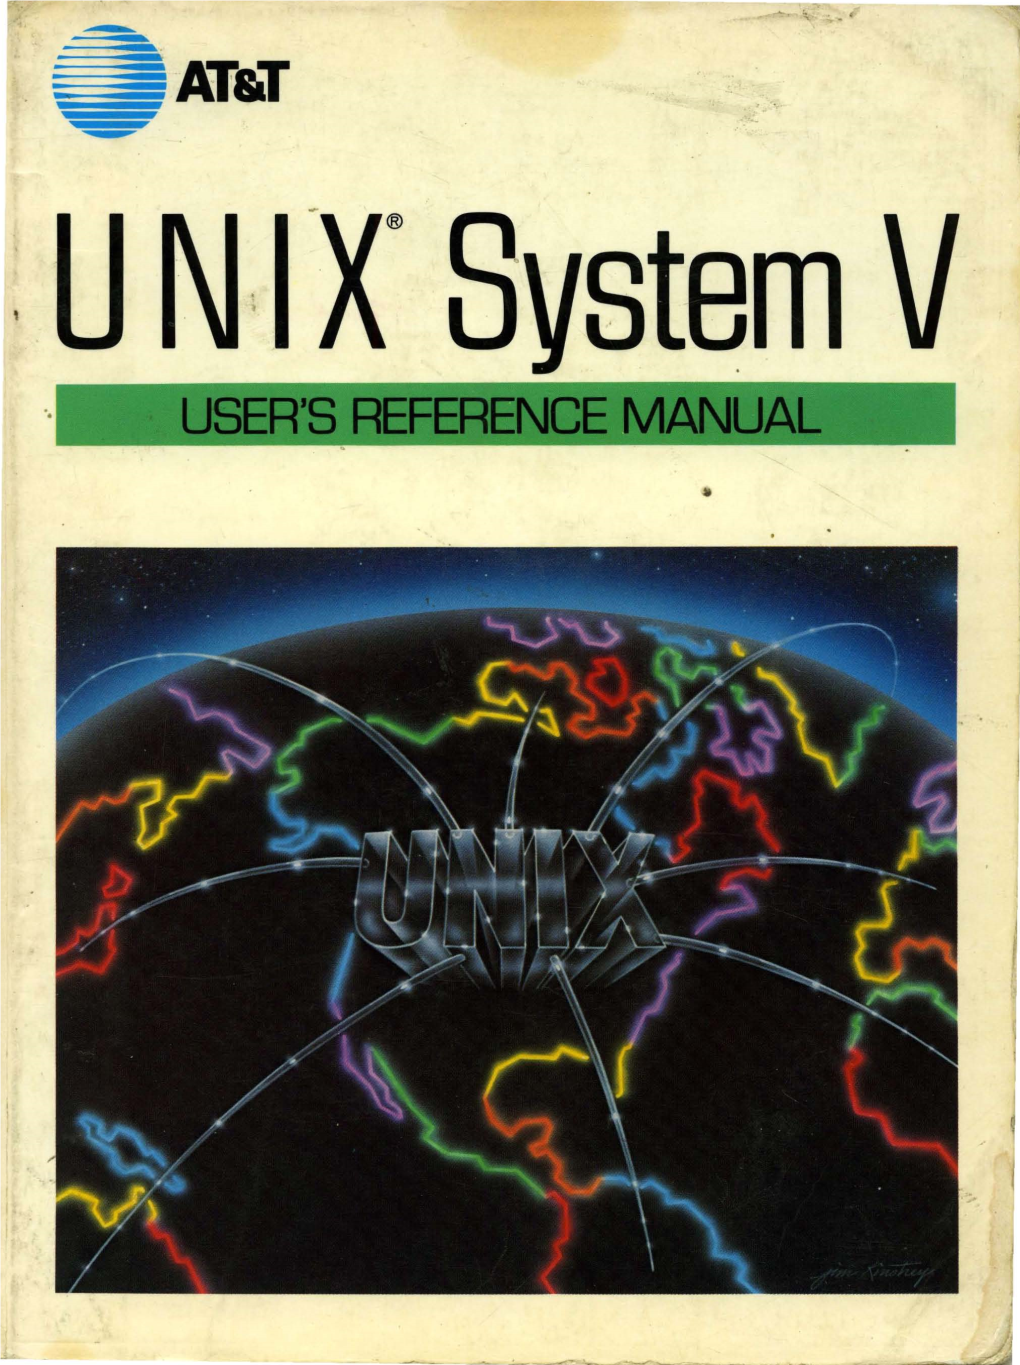 UNIX System V User's Reference Manual AT&T